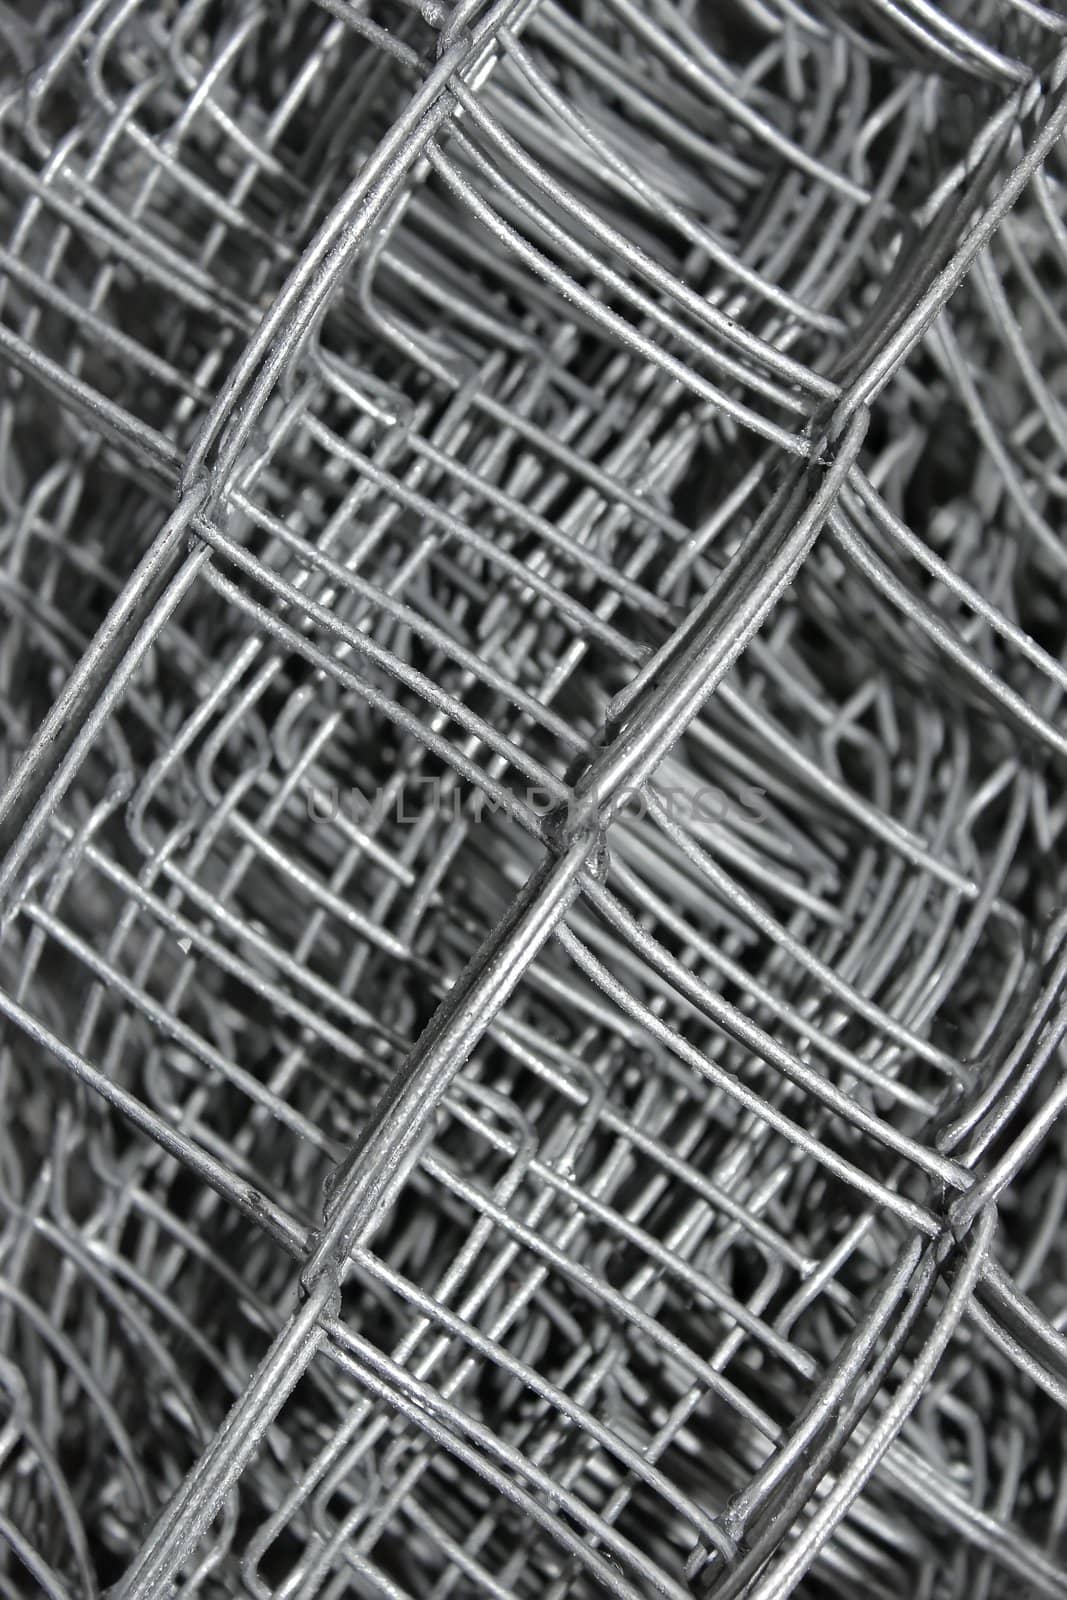 Steel mesh with water drops composed in multiple layers close-up